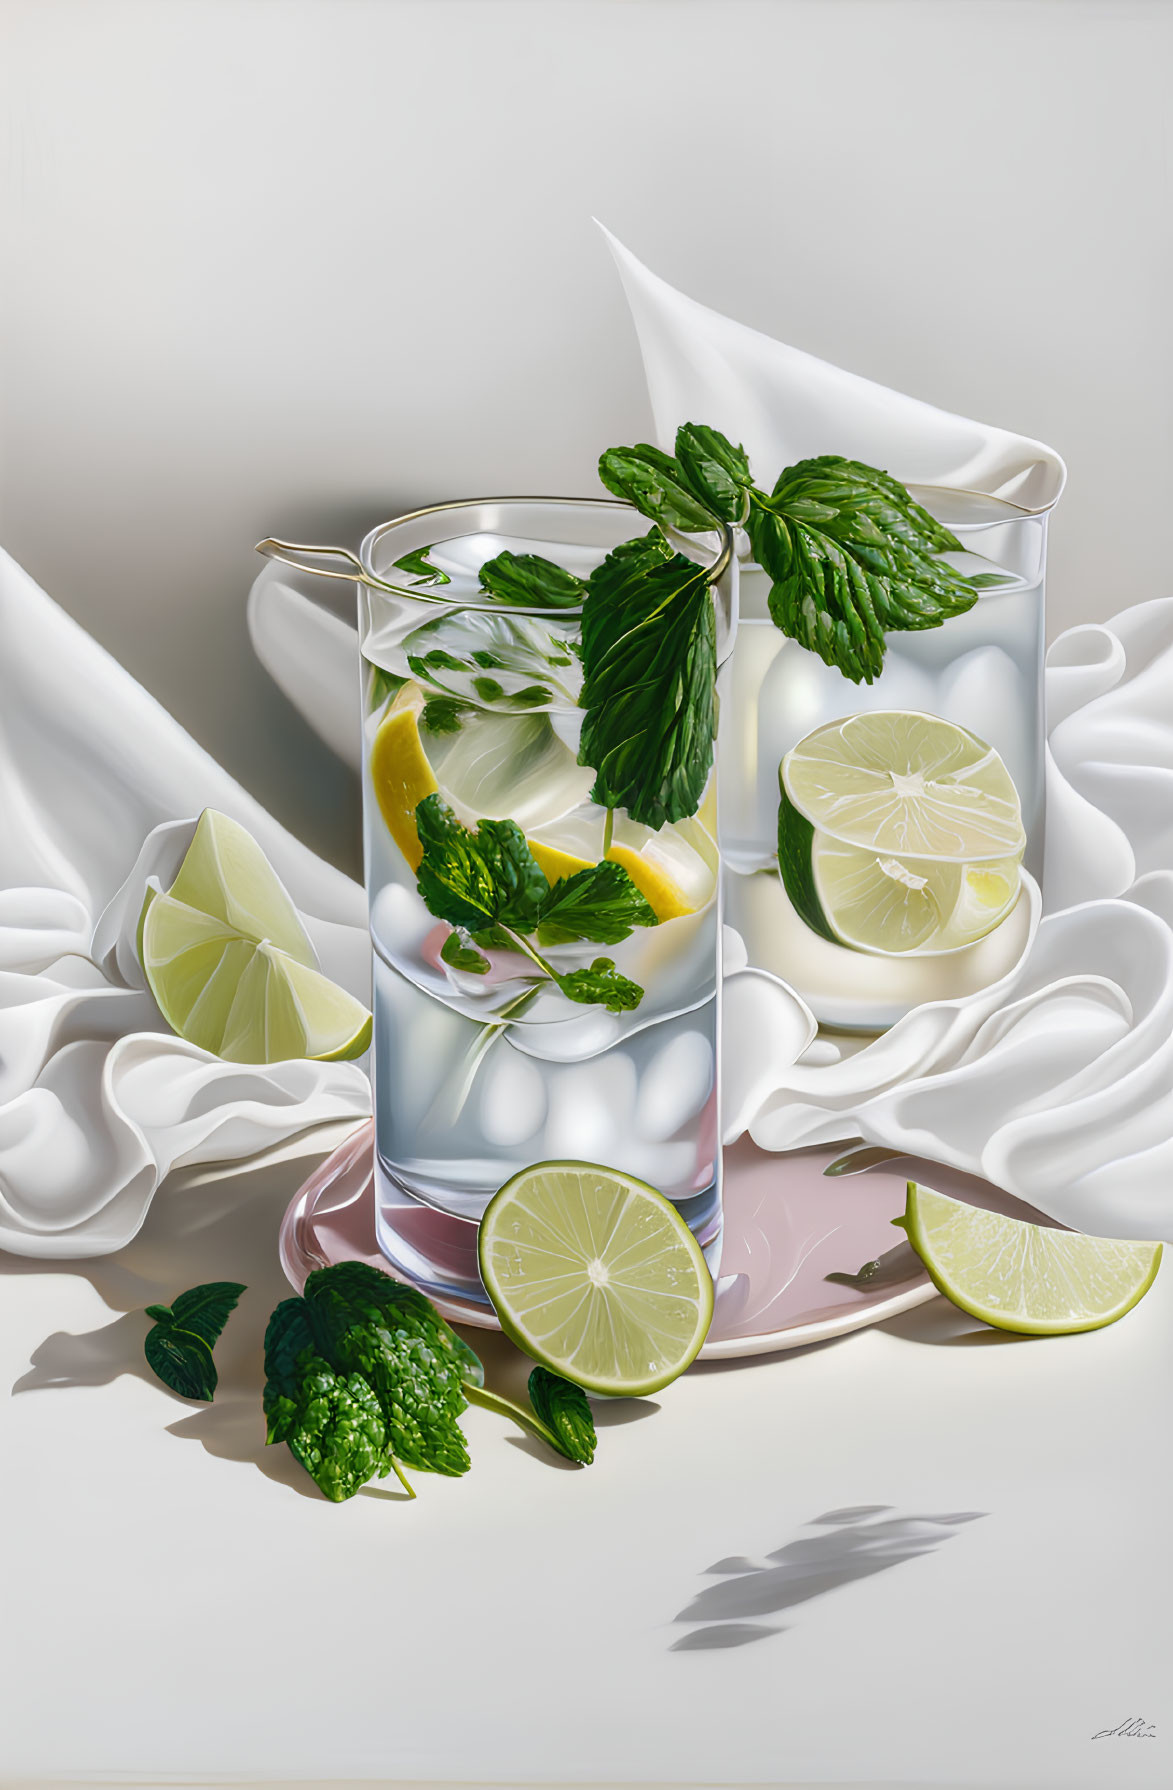 Realistic illustration: Glass of water with lemon, mint, ice on plate.